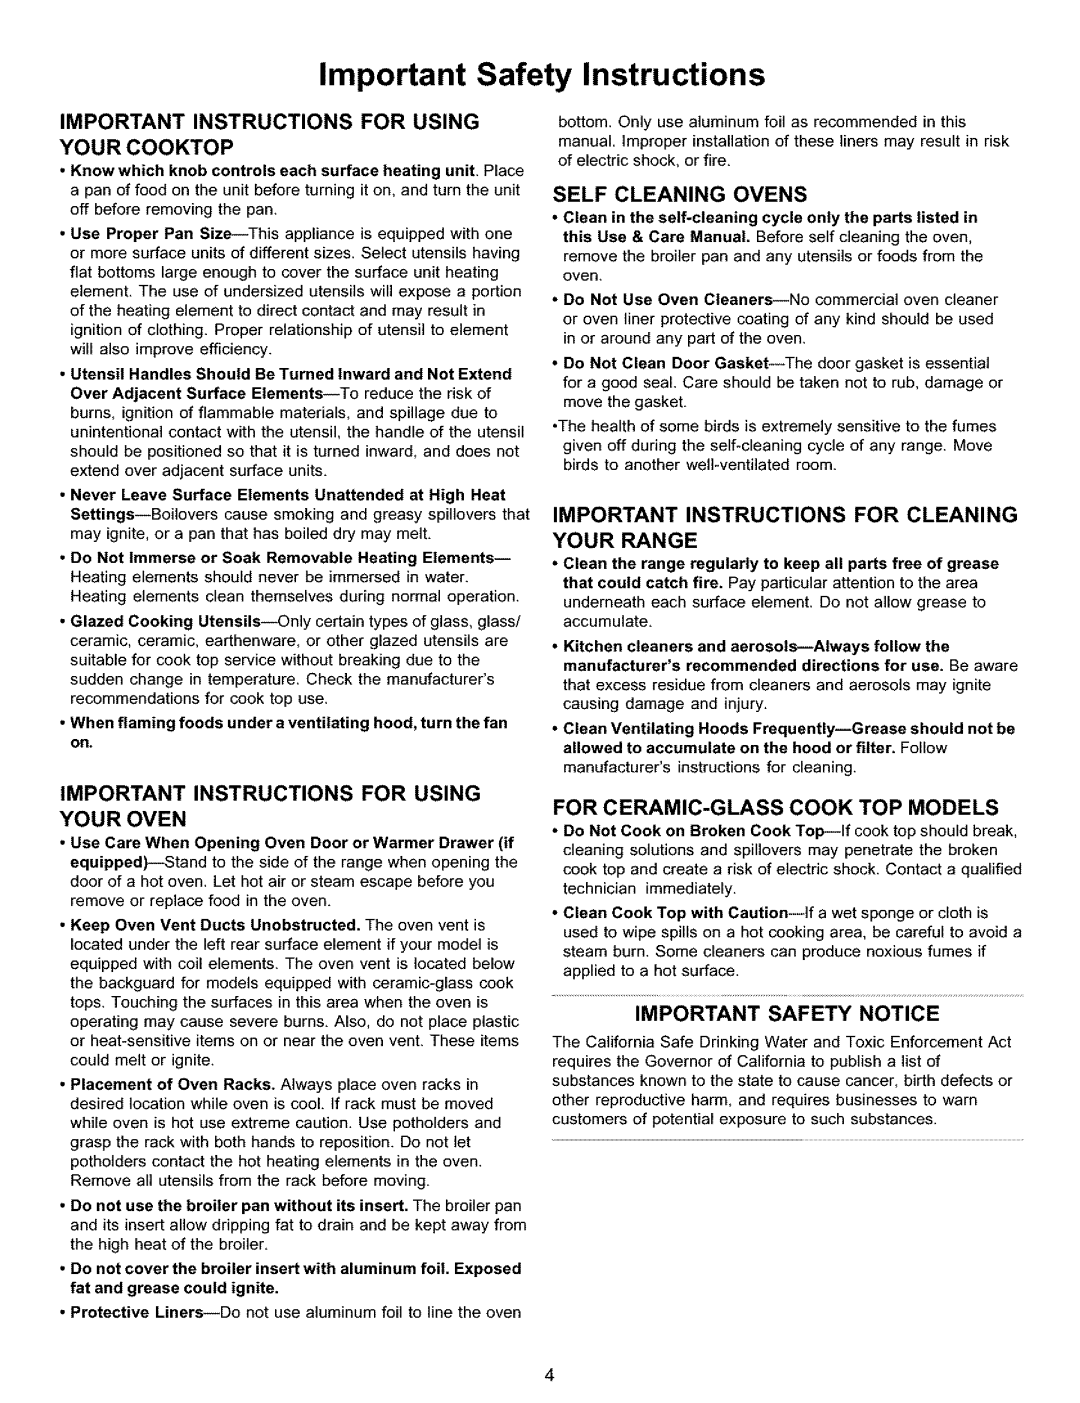 Kenmore 790.99019 manual Important Safety Instructions, Important Instructions For Using Your Cooktop, Self Cleaning Ovens 